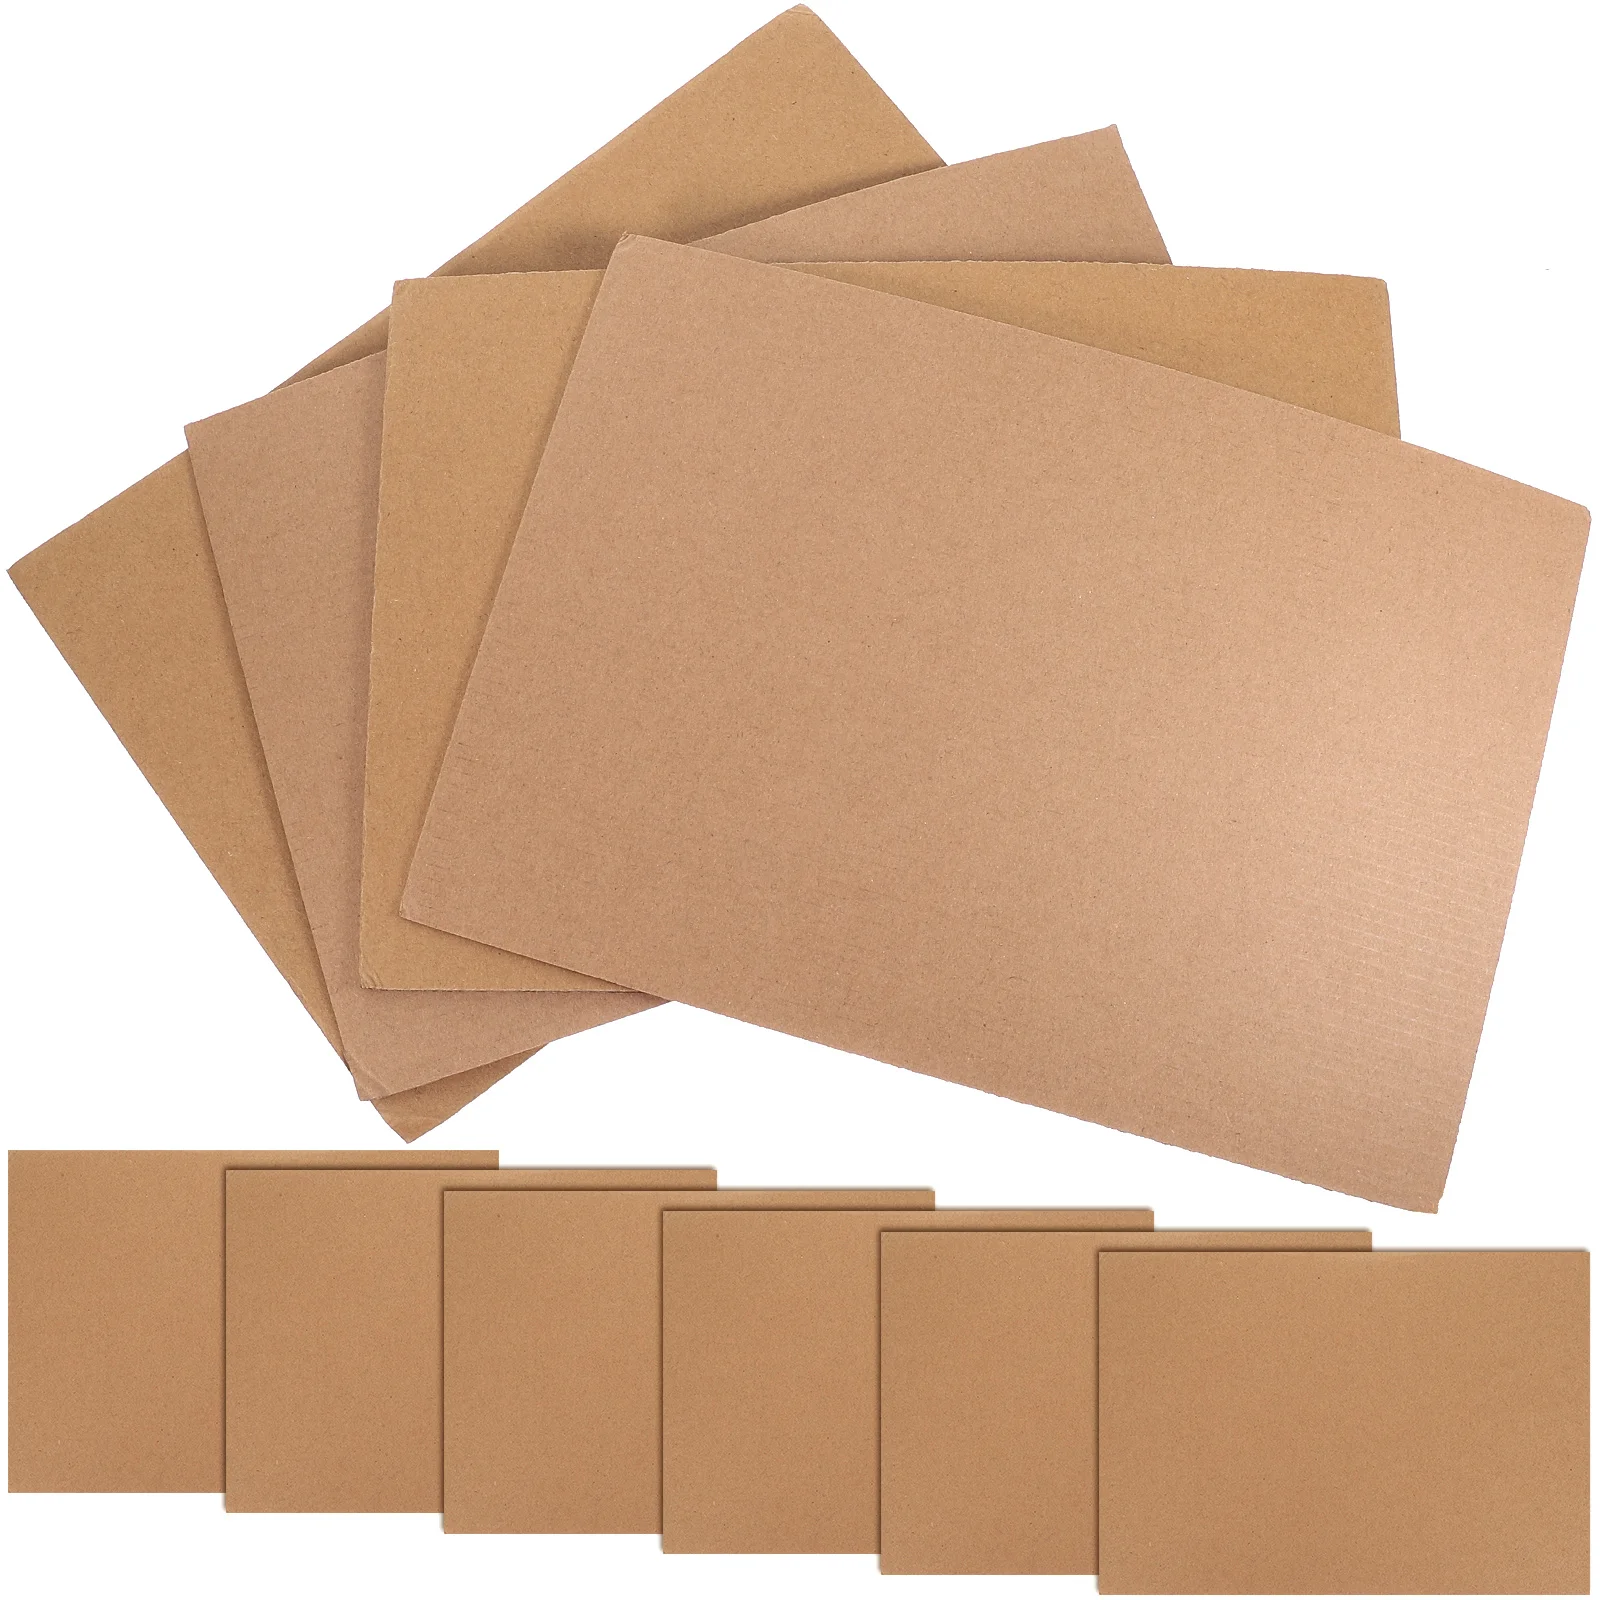 

10 Sheets Corrugated Cardboard Express Packaging Paper Industrial A4 Size Mailer Boxes Moving Shipping Protective Packing for